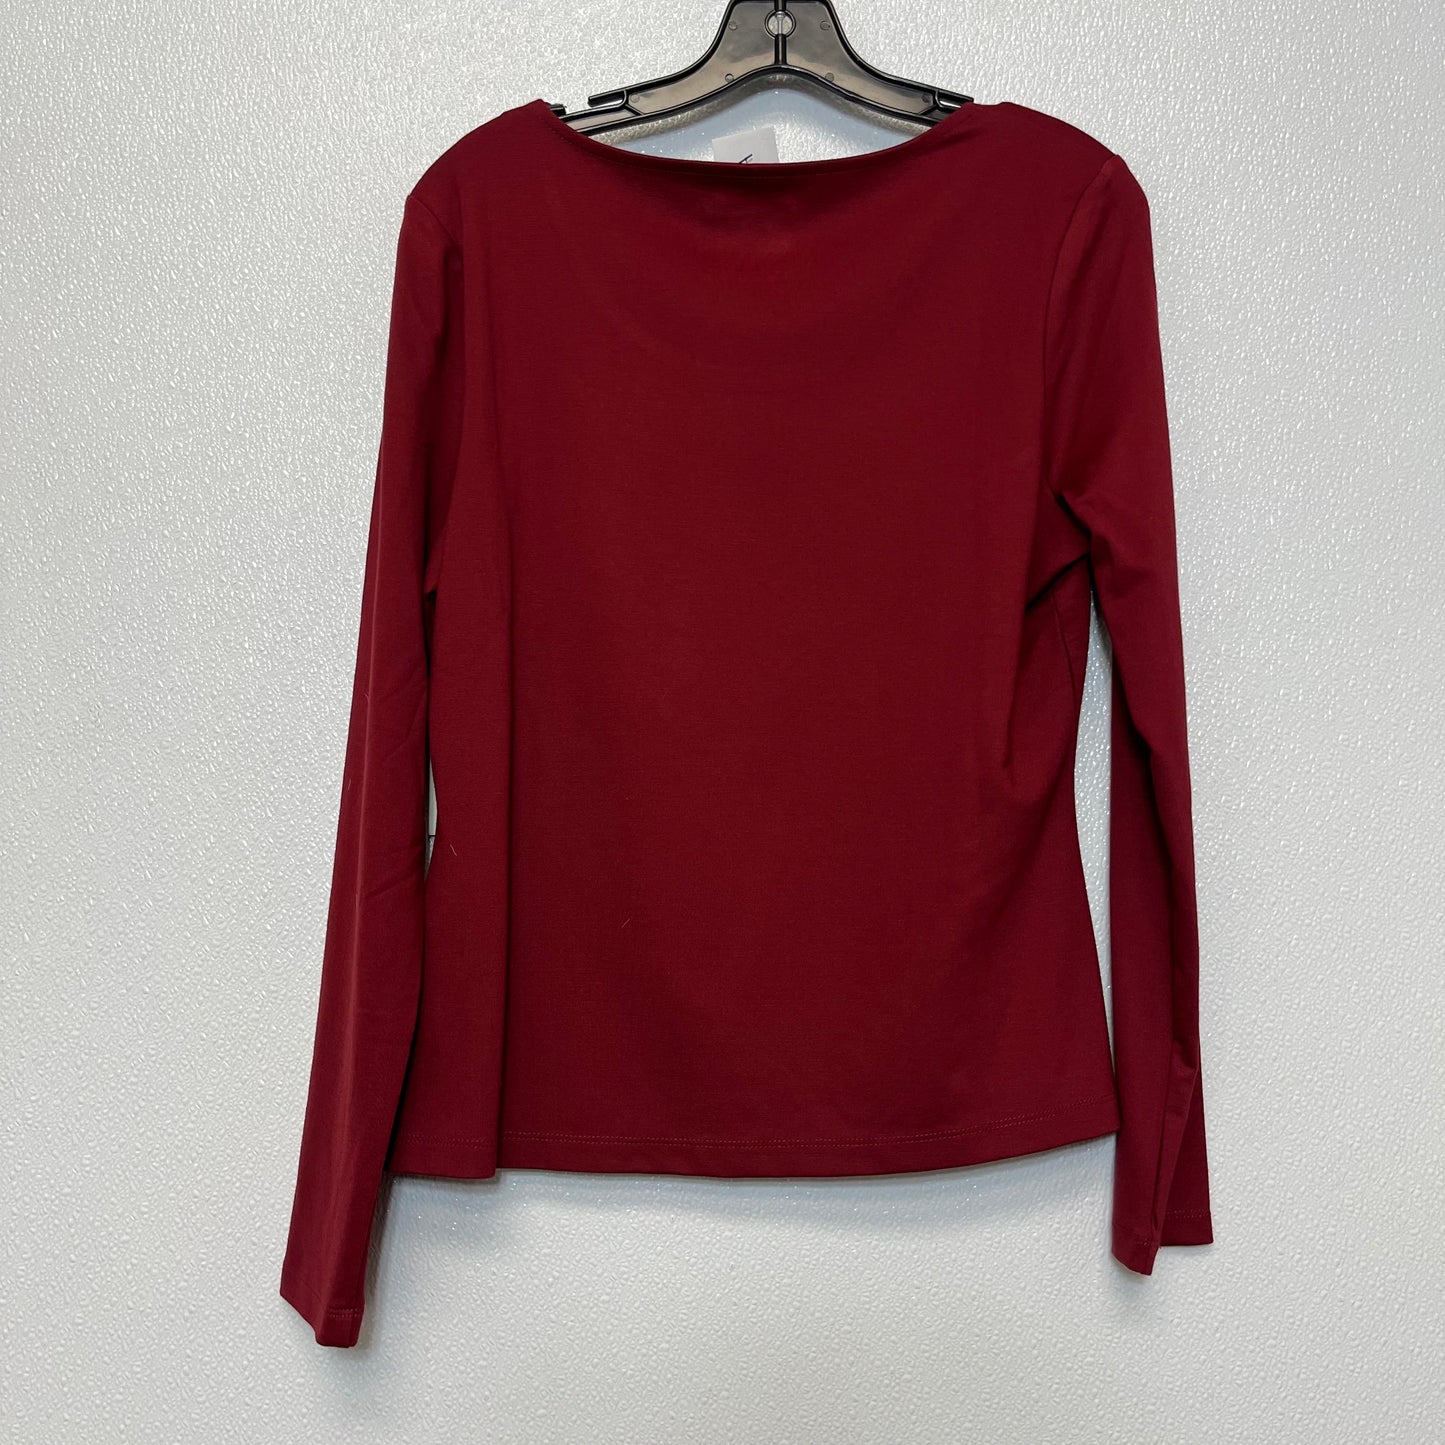 Top Long Sleeve By Adrienne Vittadini  Size: M